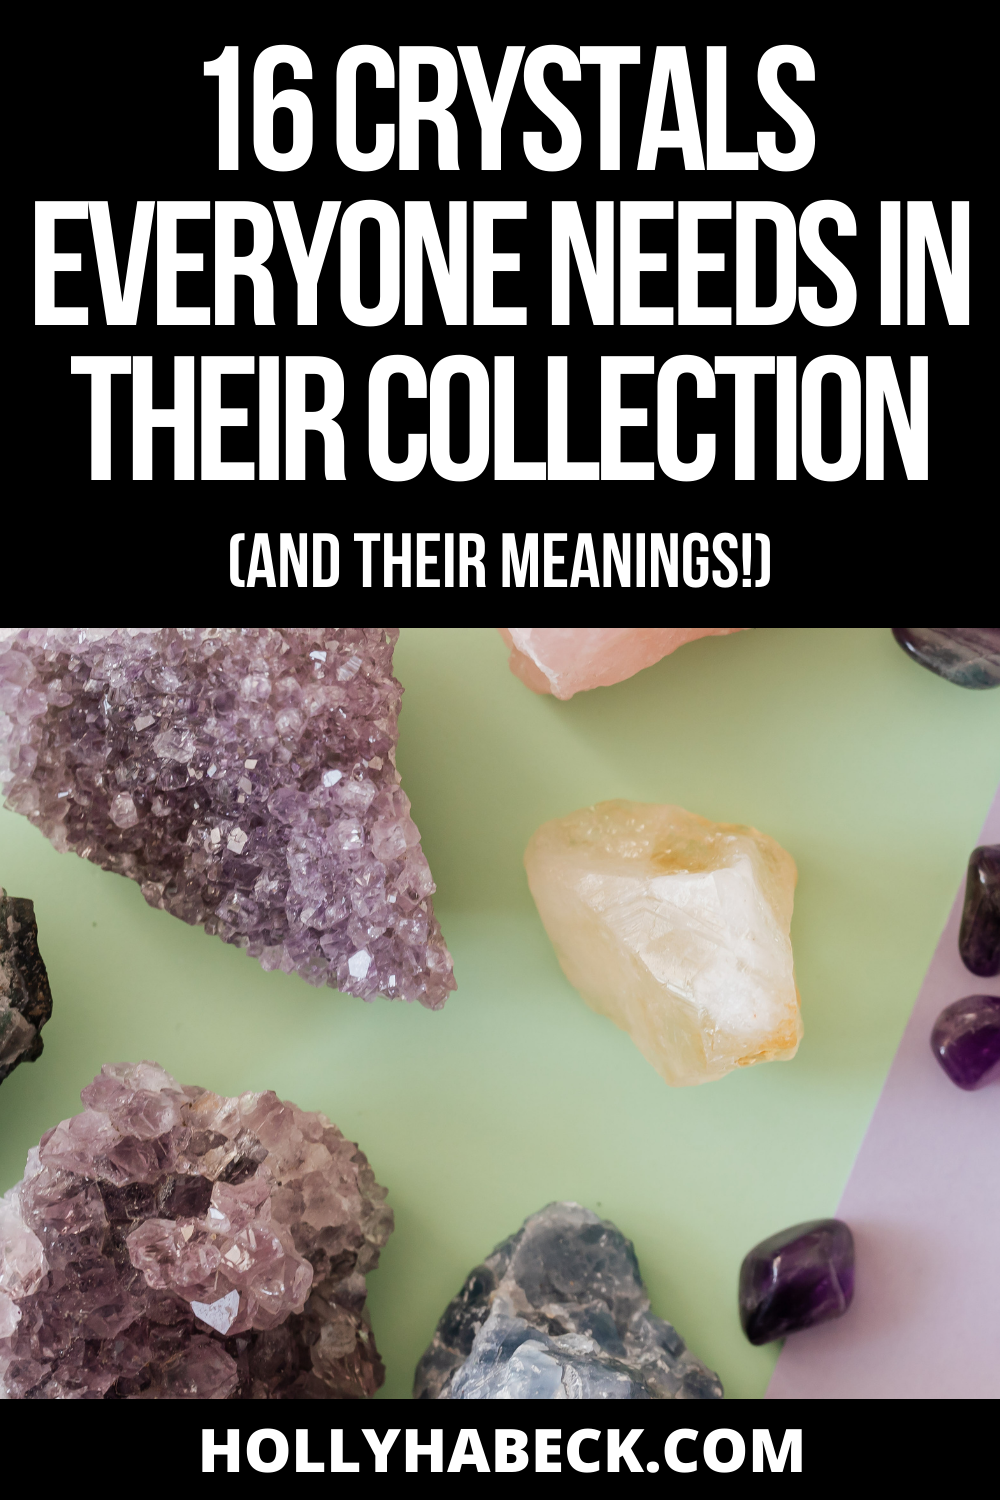 16 Crystals Everyone Needs in Their Collection And Their Meanings